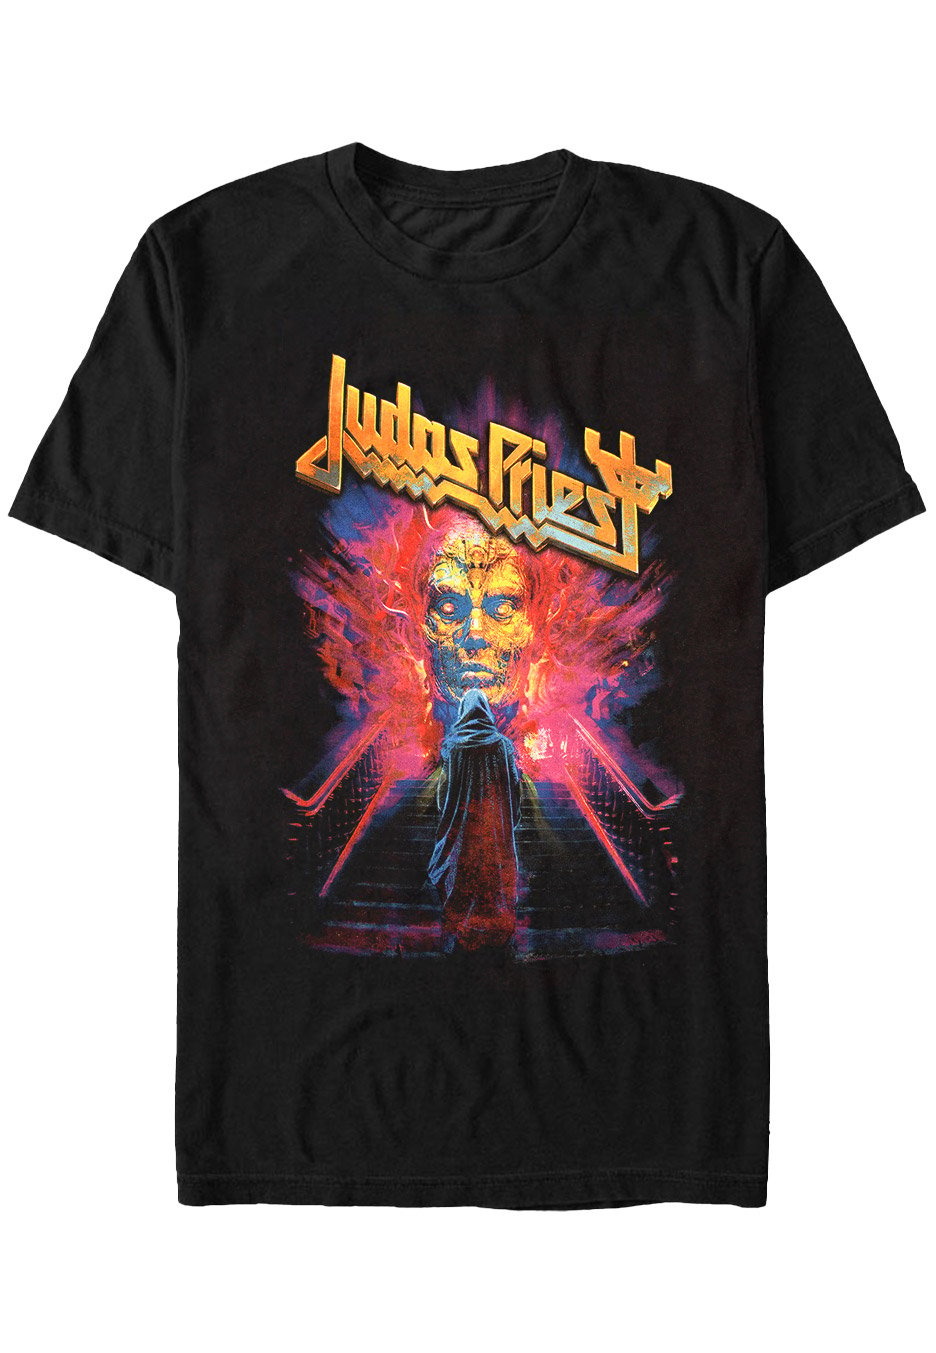 Judas Priest - Escape From Reality - T-Shirt